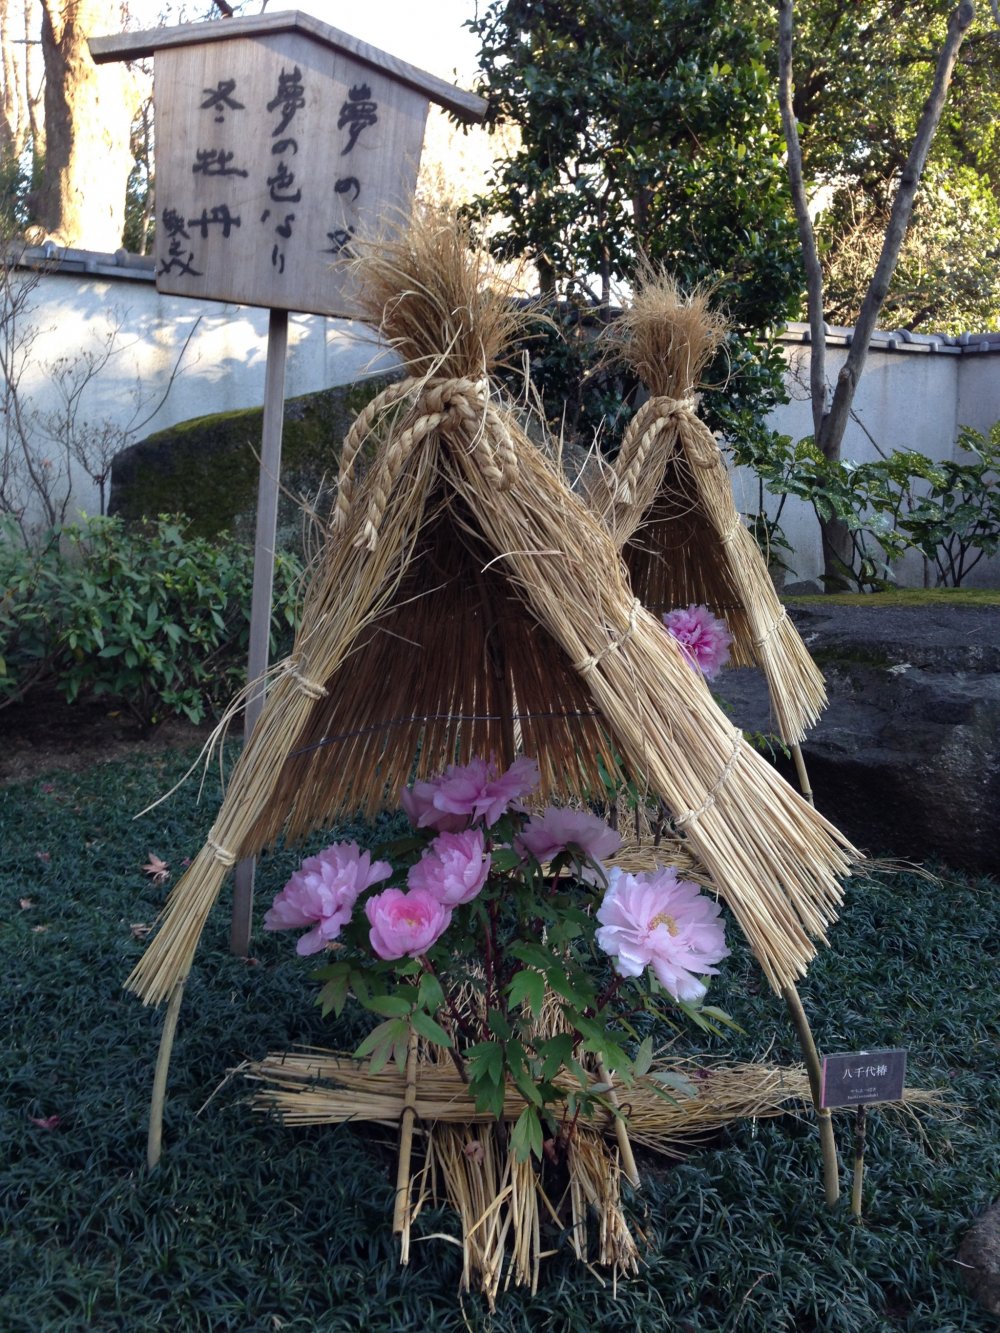 In winter, each plant is covered with a little straw "hat" quite reminiscent of a samurai's kabuto